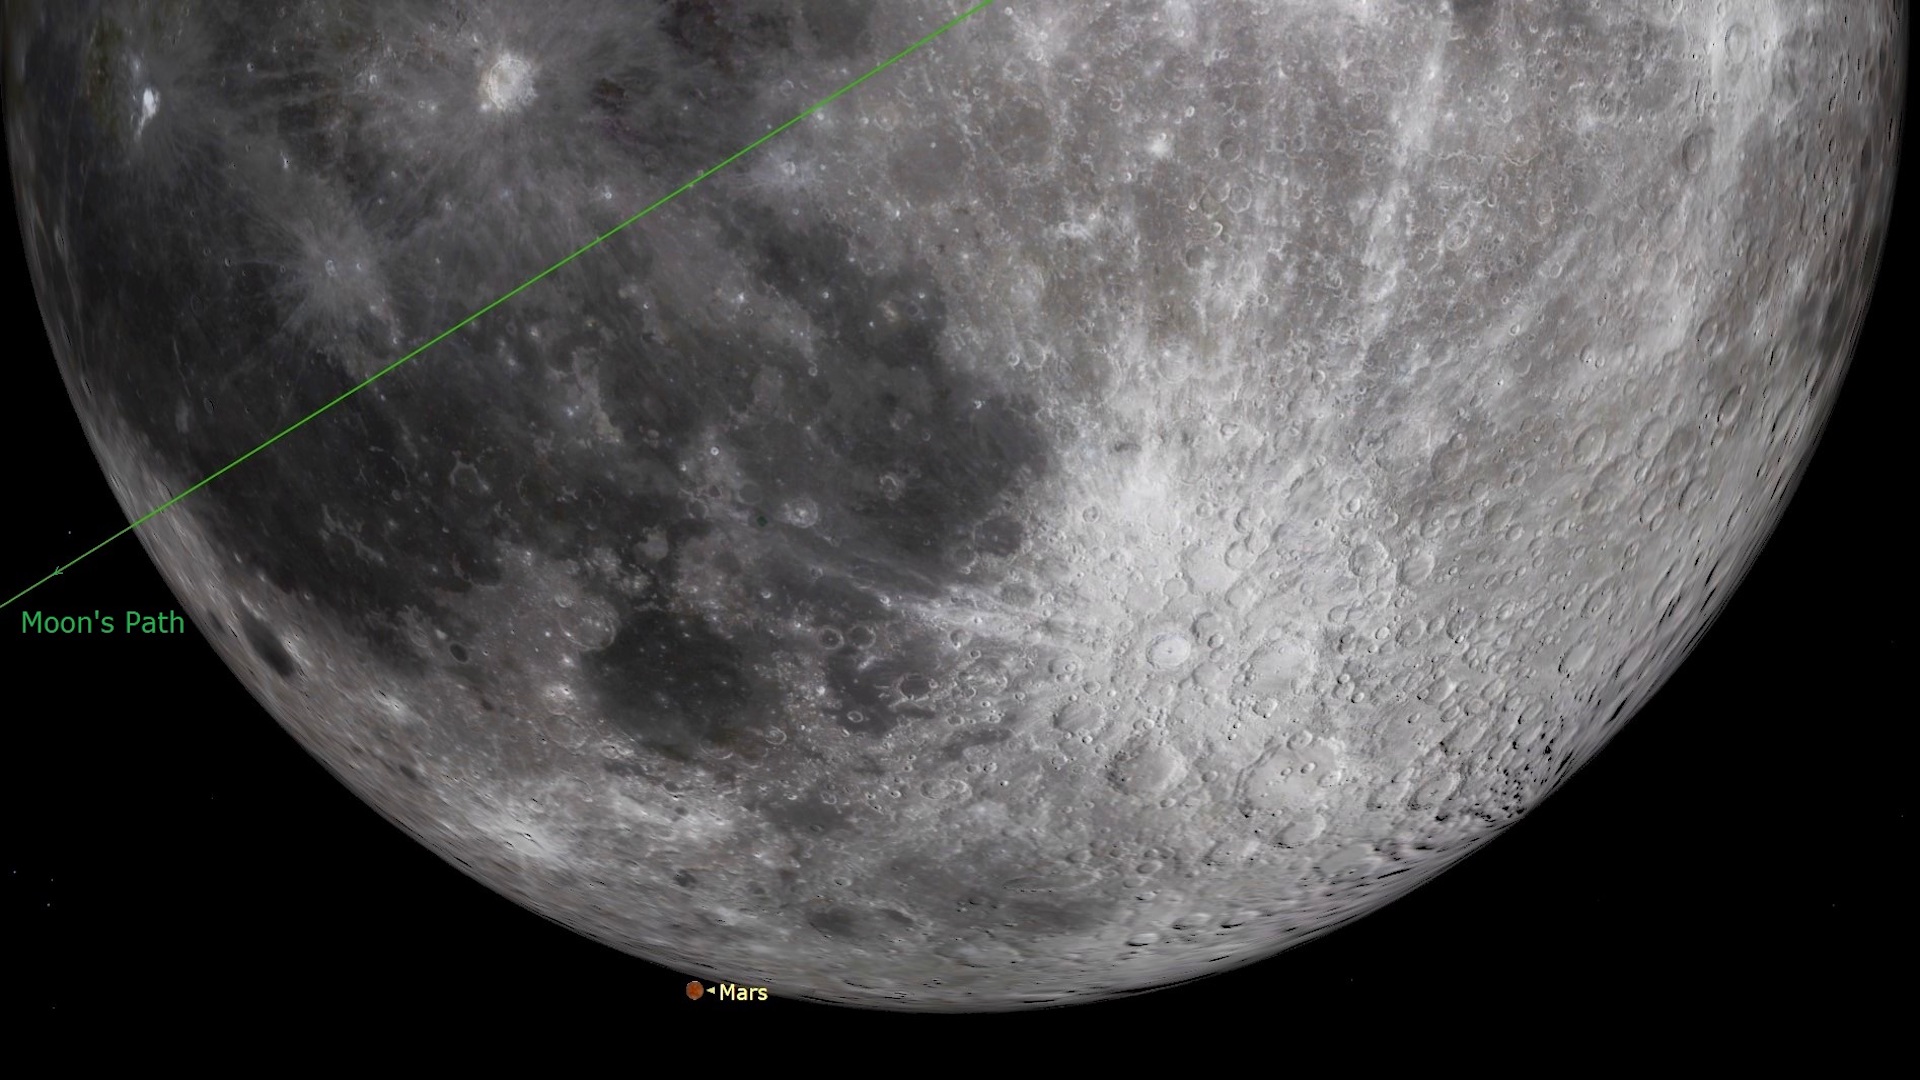 An illustration of the full Cold Moon as it will appear on Dec. 7, with Mars visible behind it.